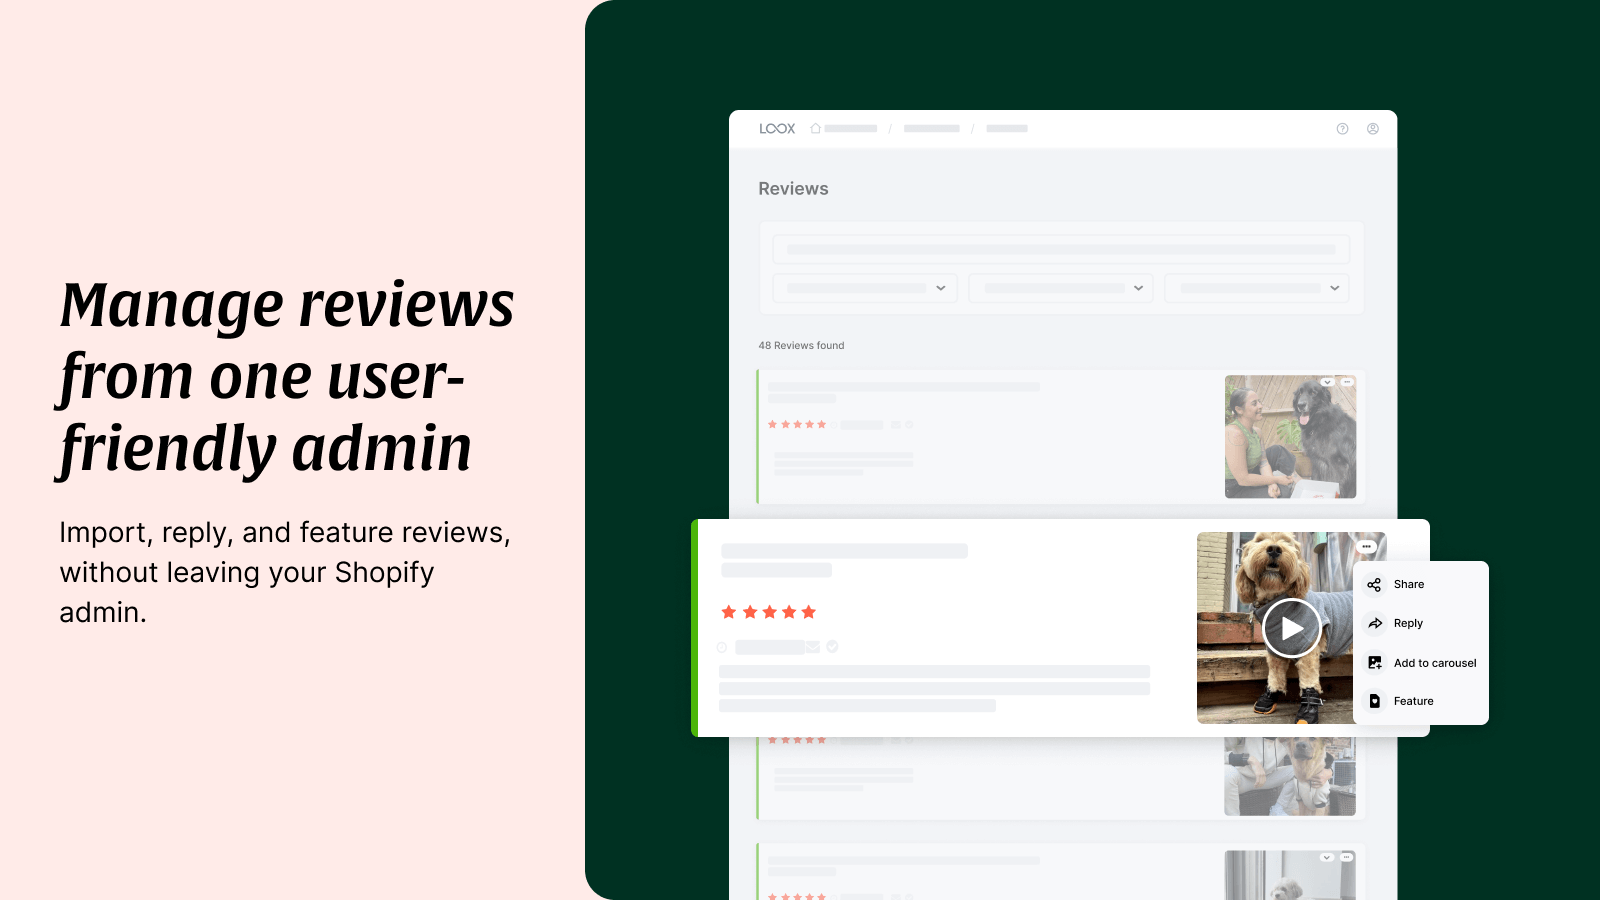 Manage, reply, and import reviews from a user friendly admin